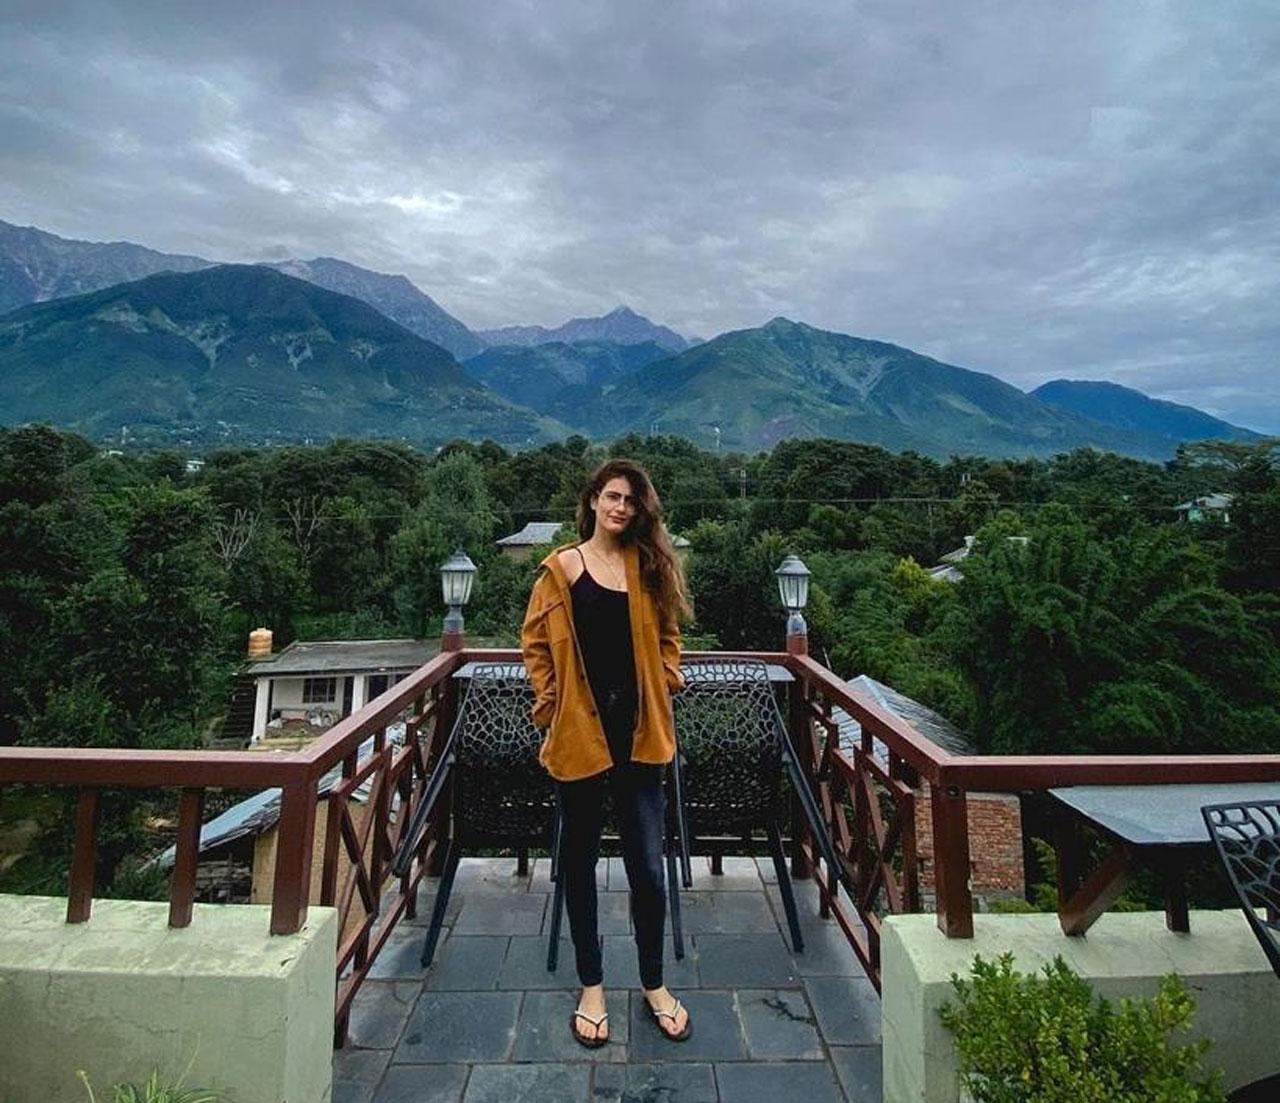 Fatima Sana Shaikh often posts images of her stay in Dharamshala as the Ludo actress seems to love her quiet and peaceful time in the city. She also enjoys her passion for photography, treks and exploring the local life there which is evident from her stunning photos on social media.